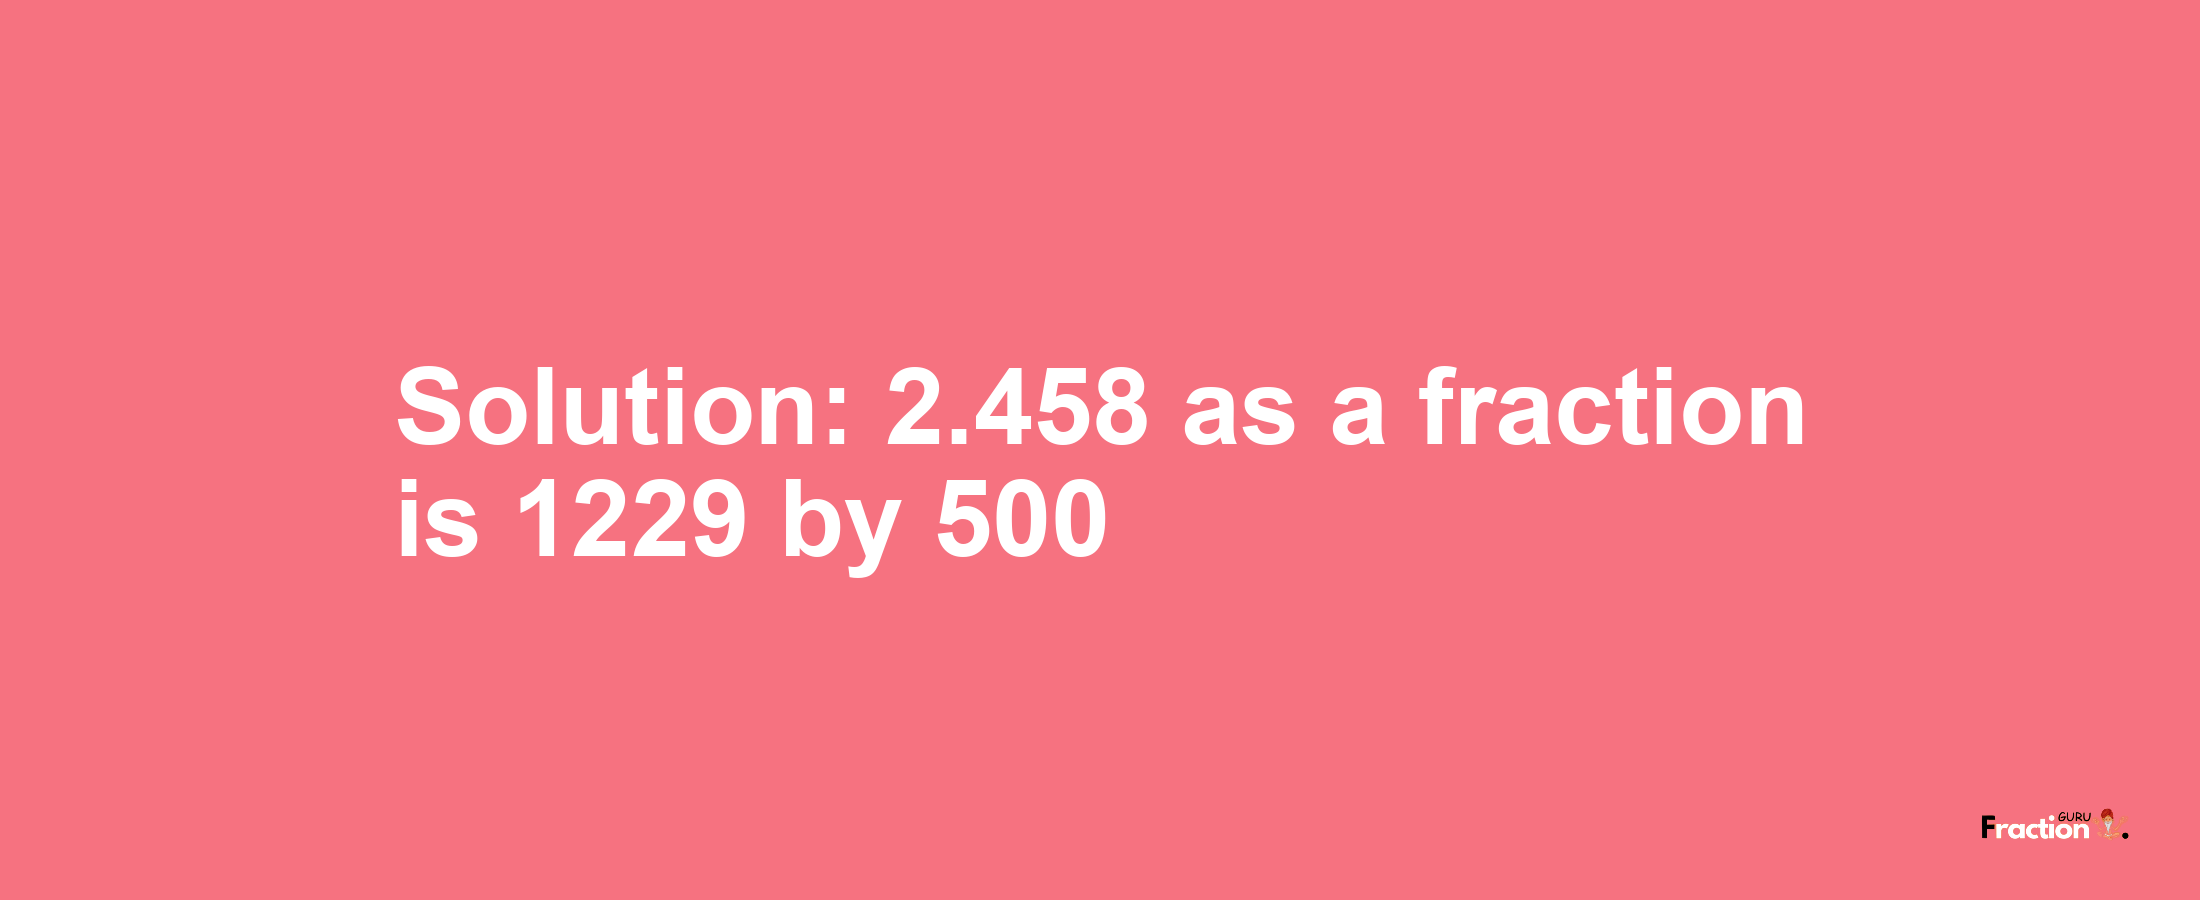 Solution:2.458 as a fraction is 1229/500